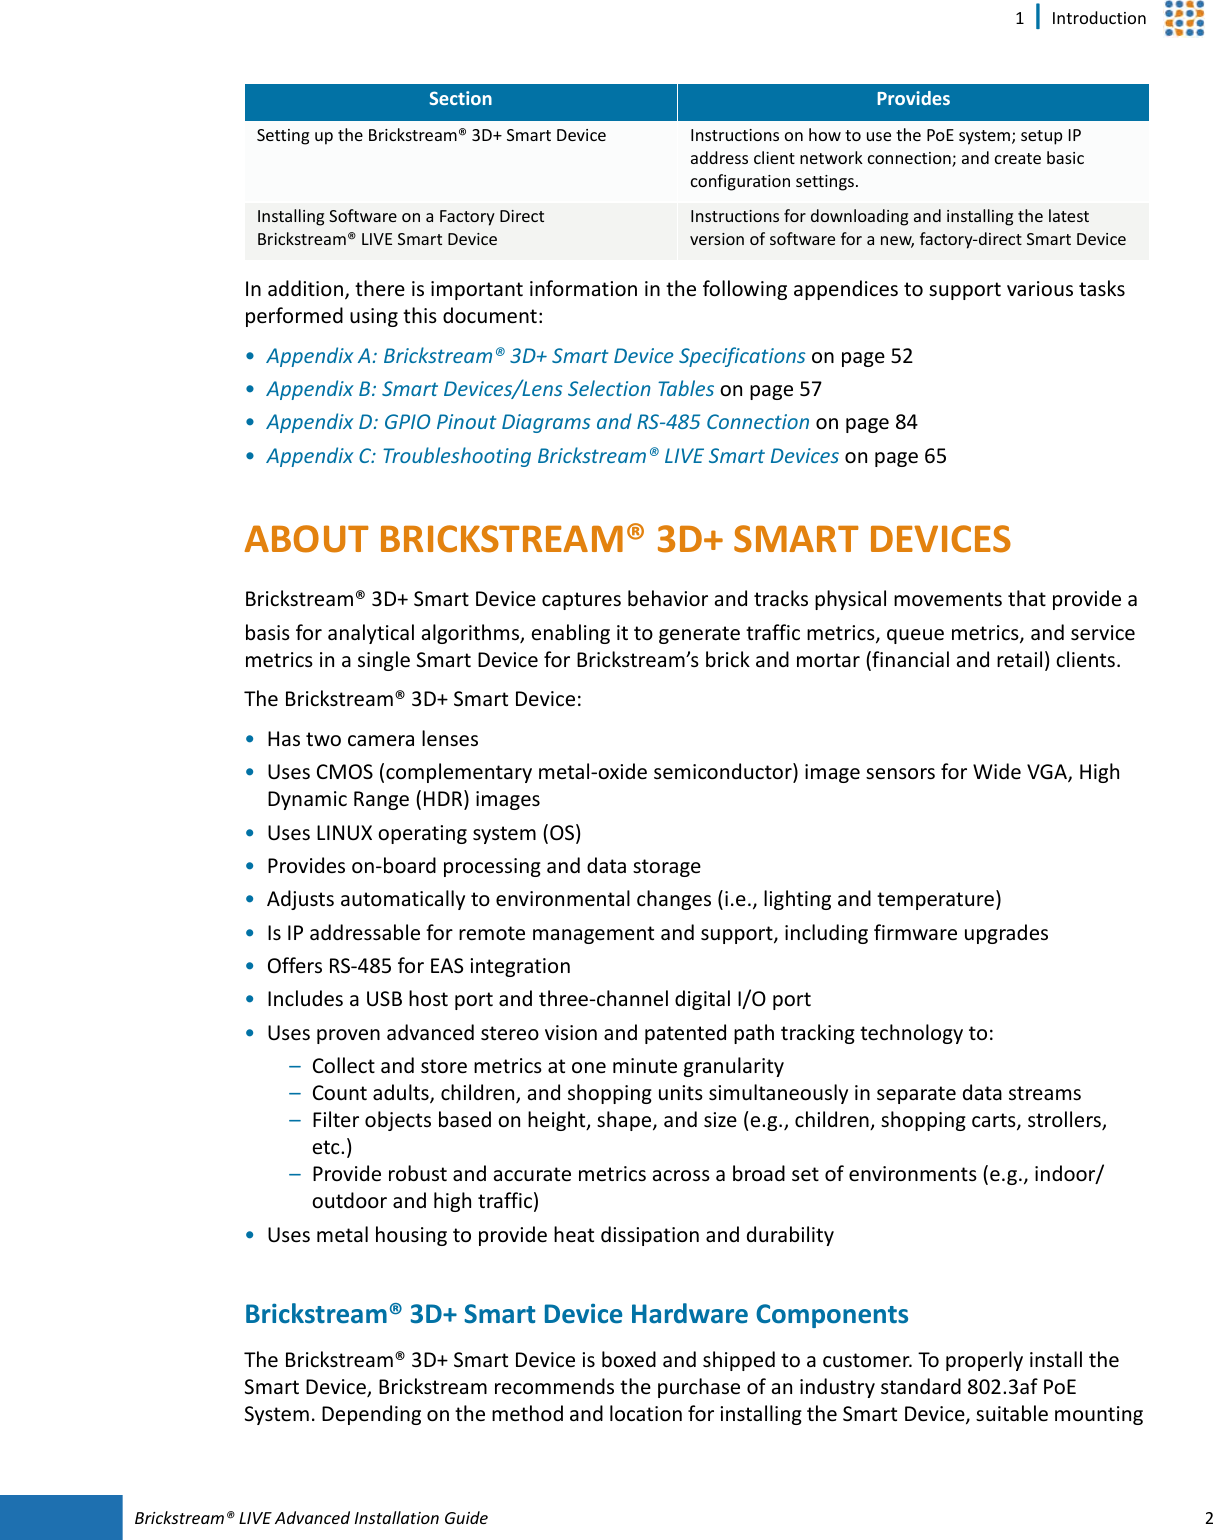 Brickstream®  LIVE Advanced Installation Guide 21 | IntroductionIn addition, there is important information in the following appendices to support various tasks performed using this document:•Appendix A: Brickstream® 3D+ Smart Device Specifications on page 52•Appendix B: Smart  Devices/Lens Selection Tables on page 57•Appendix D: GPIO Pinout Diagrams and RS-485 Connection on page 84•Appendix C: Troubleshooting Brickstream® LIVE Smart Devices on page 65ABOUT BRICKSTREAM®  3D+ SMART  DEVICESBrickstream® 3D+ Smart  Device captures behavior and tracks physical movements that provide a basis for analytical algorithms, enabling it to generate traffic metrics, queue metrics, and service metrics in a single Smart  Device for Brickstream’s brick and mortar (financial and retail) clients. The Brickstream® 3D+ Smart Device:•Has two camera lenses•Uses CMOS (complementary metal-oxide semiconductor) image sensors for Wide VGA, High Dynamic Range (HDR) images•Uses LINUX operating system (OS)•Provides on-board processing and data storage•Adjusts automatically to environmental changes (i.e., lighting and temperature)•Is IP addressable for remote management and support, including firmware upgrades•Offers RS-485 for EAS integration•Includes a USB host port and three-channel digital I/O port•Uses proven advanced stereo vision and patented path tracking technology to:–Collect and store metrics at one minute granularity–Count adults, children, and shopping units simultaneously in separate data streams–Filter objects based on height, shape, and size (e.g., children, shopping carts, strollers, etc.)–Provide robust and accurate metrics across a broad set of environments (e.g., indoor/outdoor and high traffic)•Uses metal housing to provide heat dissipation and durabilityBrickstream®  3D+ Smart  Device Hardware ComponentsThe Brickstream® 3D+ Smart  Device is boxed and shipped to a customer. To properly install the Smart  Device, Brickstream recommends the purchase of an industry standard 802.3af PoE System. Depending on the method and location for installing the Smart Device, suitable mounting Setting up the Brickstream® 3D+ Smart Device Instructions on how to use the PoE system; setup IP address client network connection; and create basic configuration settings. Installing Software on a Factory Direct Brickstream® LIVE Smart DeviceInstructions for downloading and installing the latest version of software for a new, factory-direct Smart DeviceSection Provides